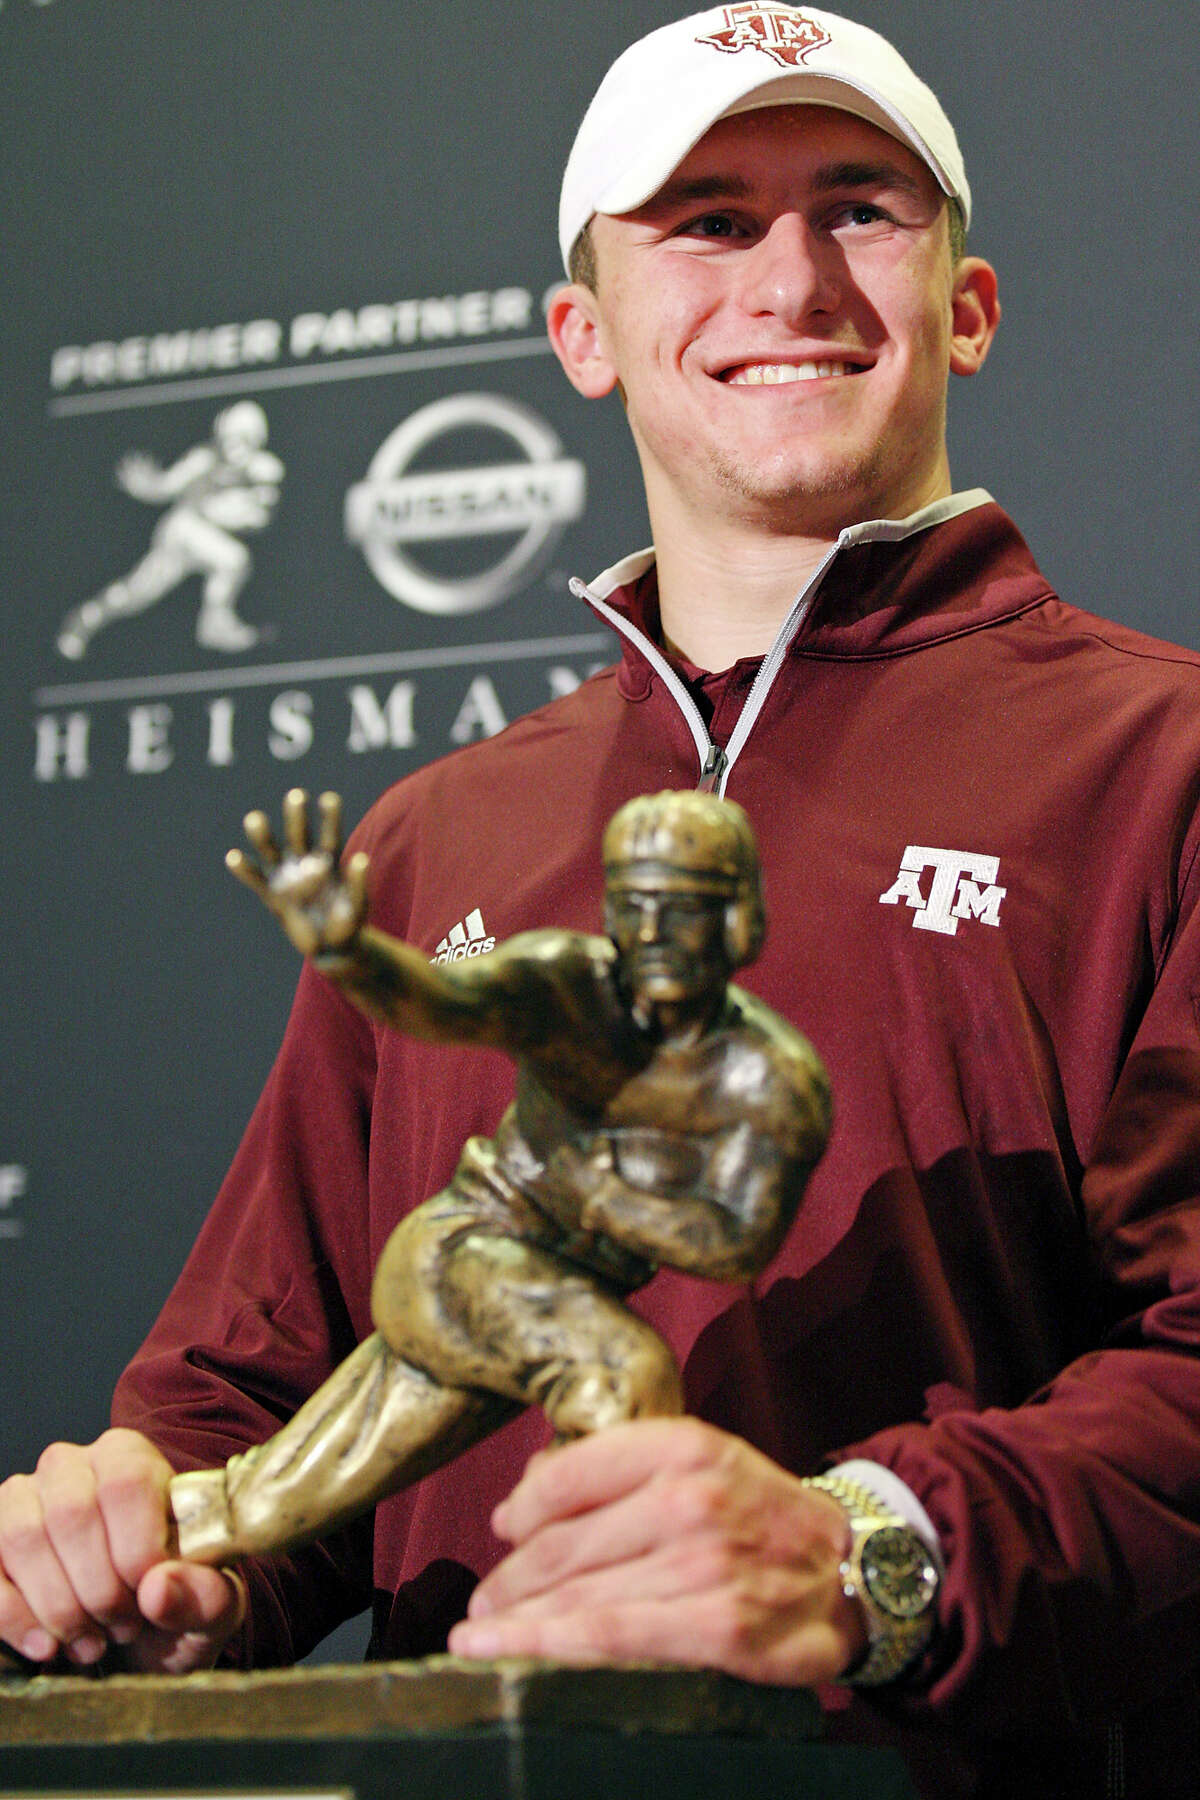 Heisman finalist Texas A&M's quarterback Johnny Manziel pose with the Heisman Trophy during a press conference Friday Dec. 7, 2012 at the New York Marriott Marquis hotel in New York, New York.